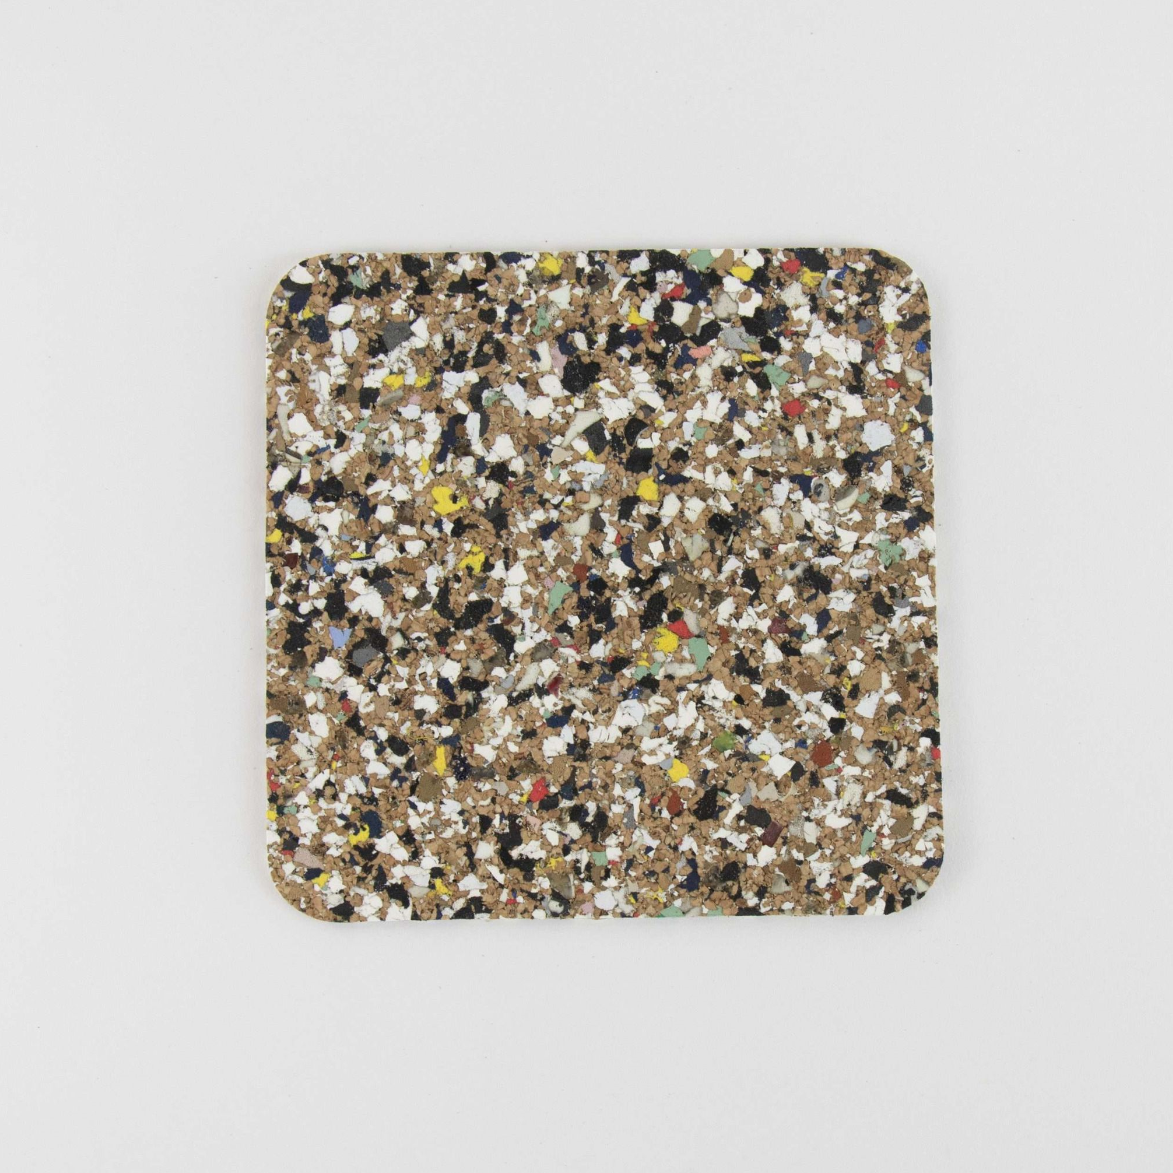 Beach Clean Coasters - Square (set of 4) by Liga